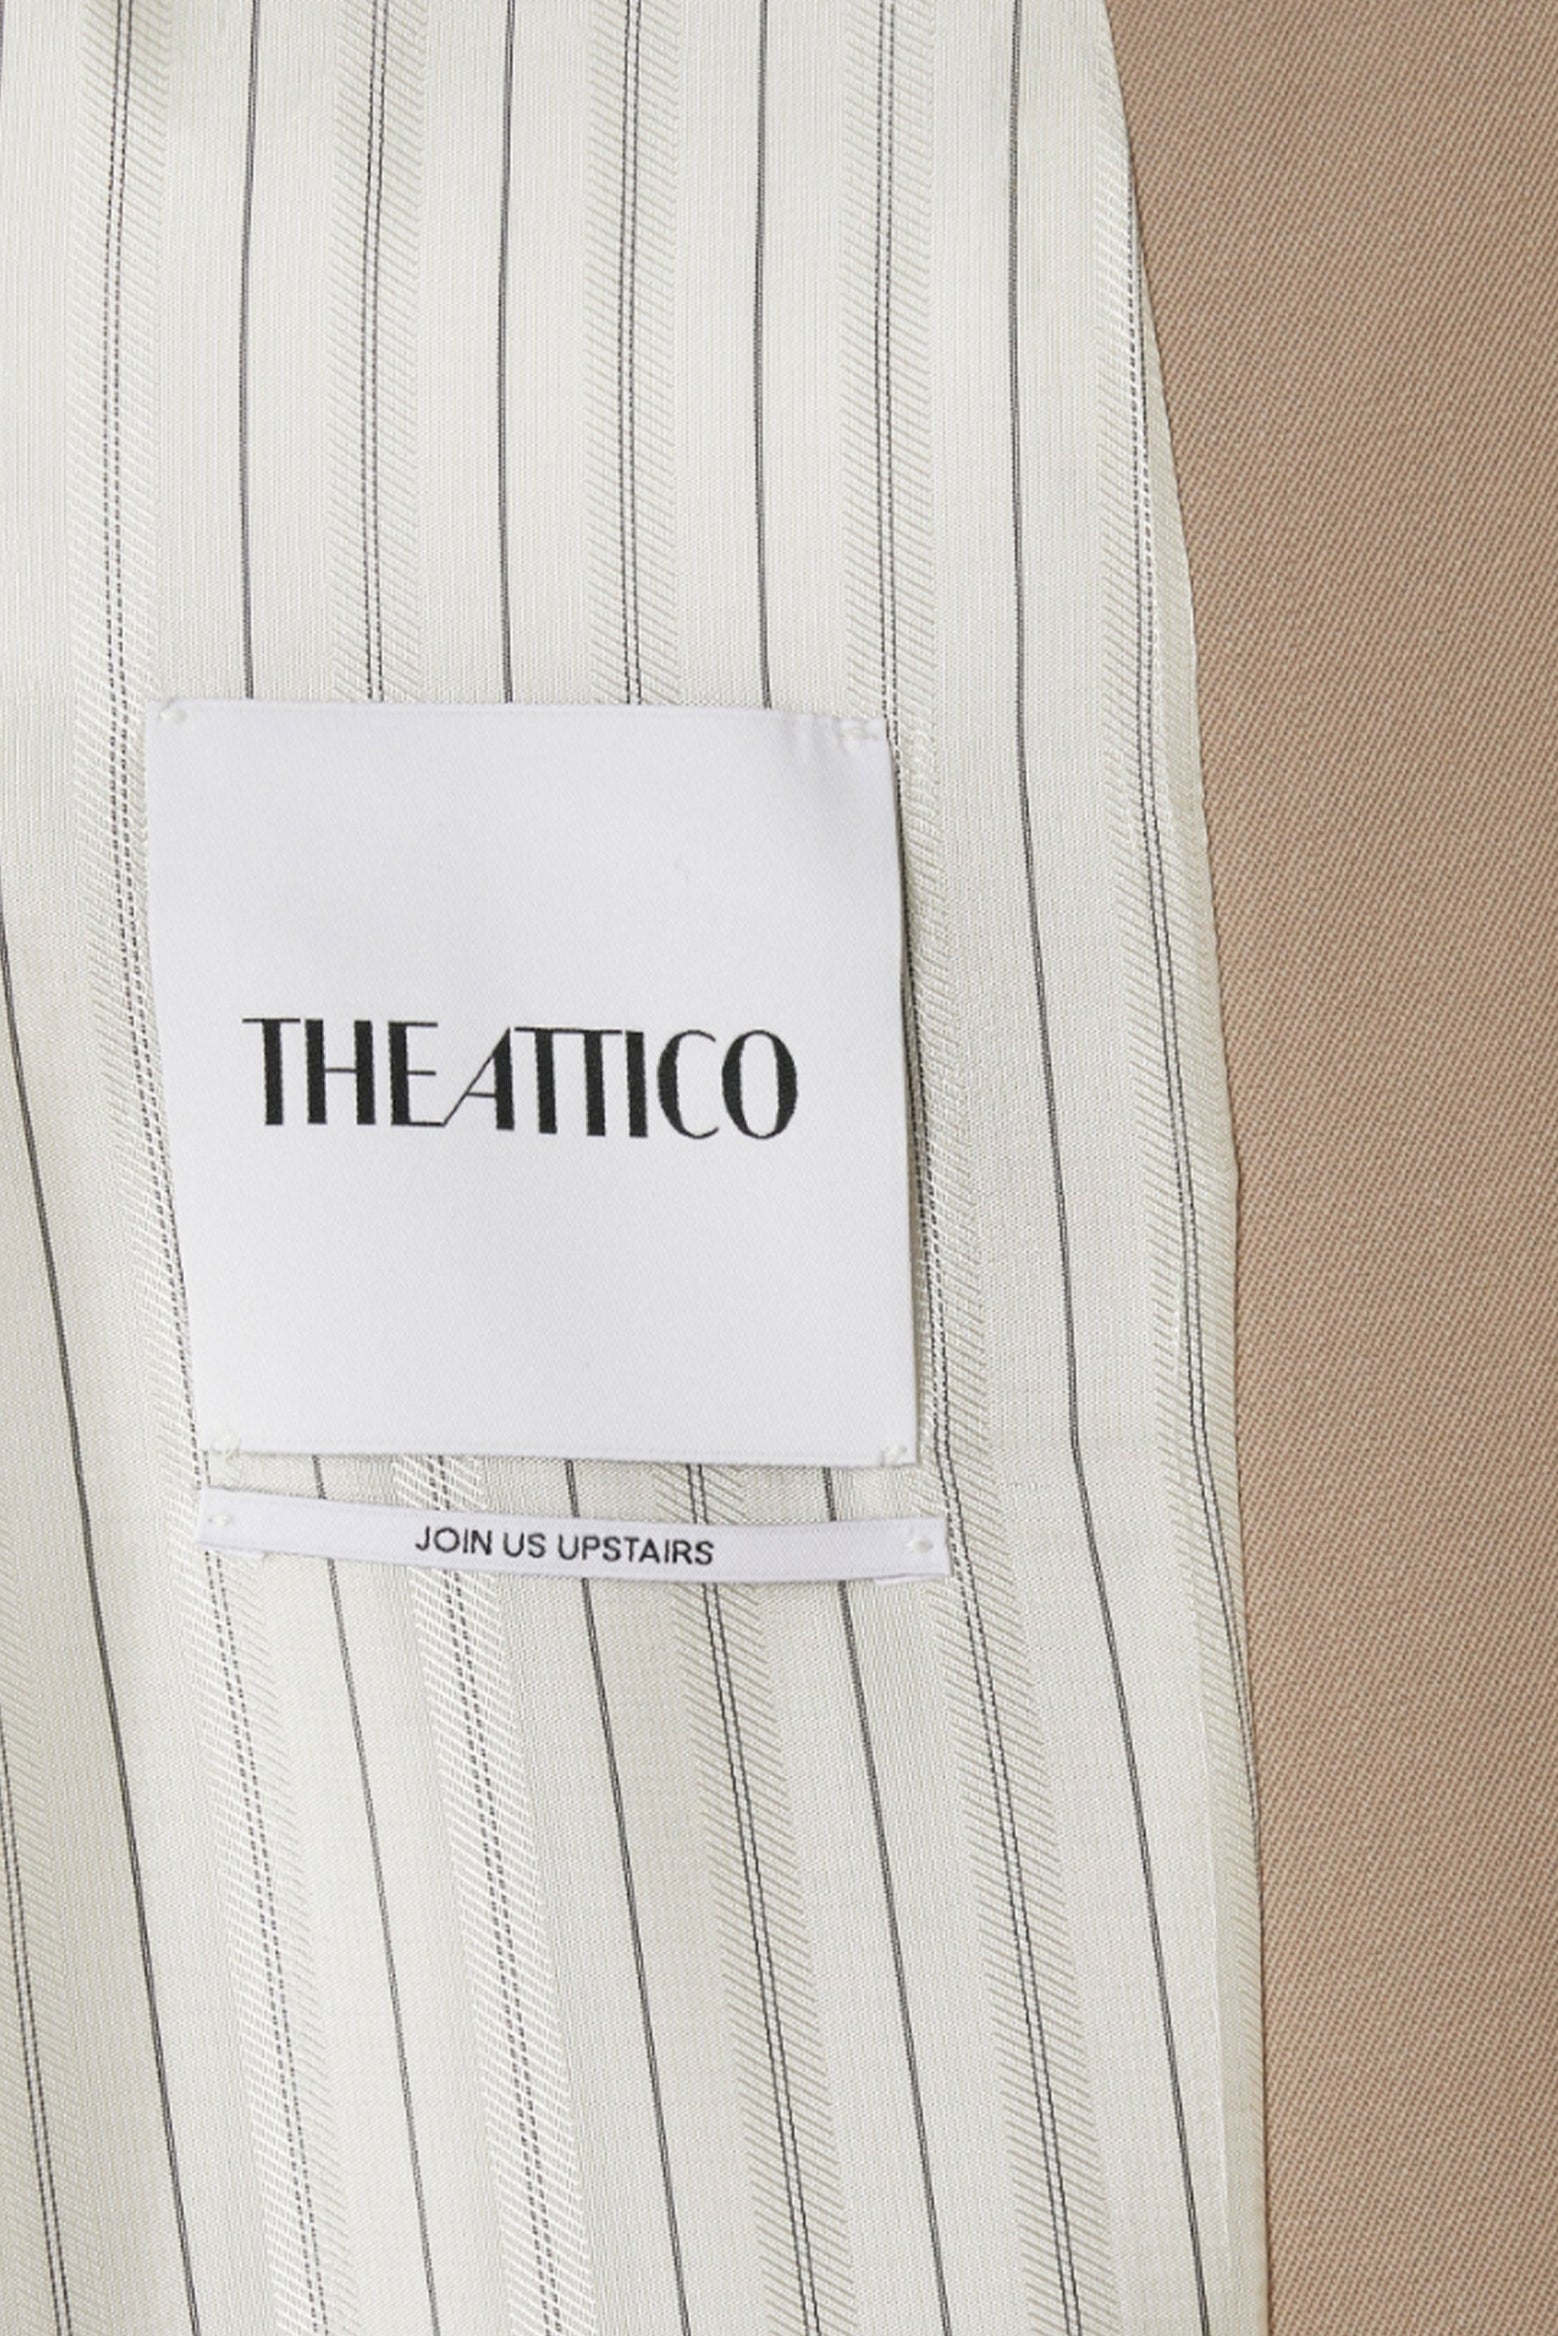 The Glen Blazer in Beige by The Attico available at The New Trend Australia